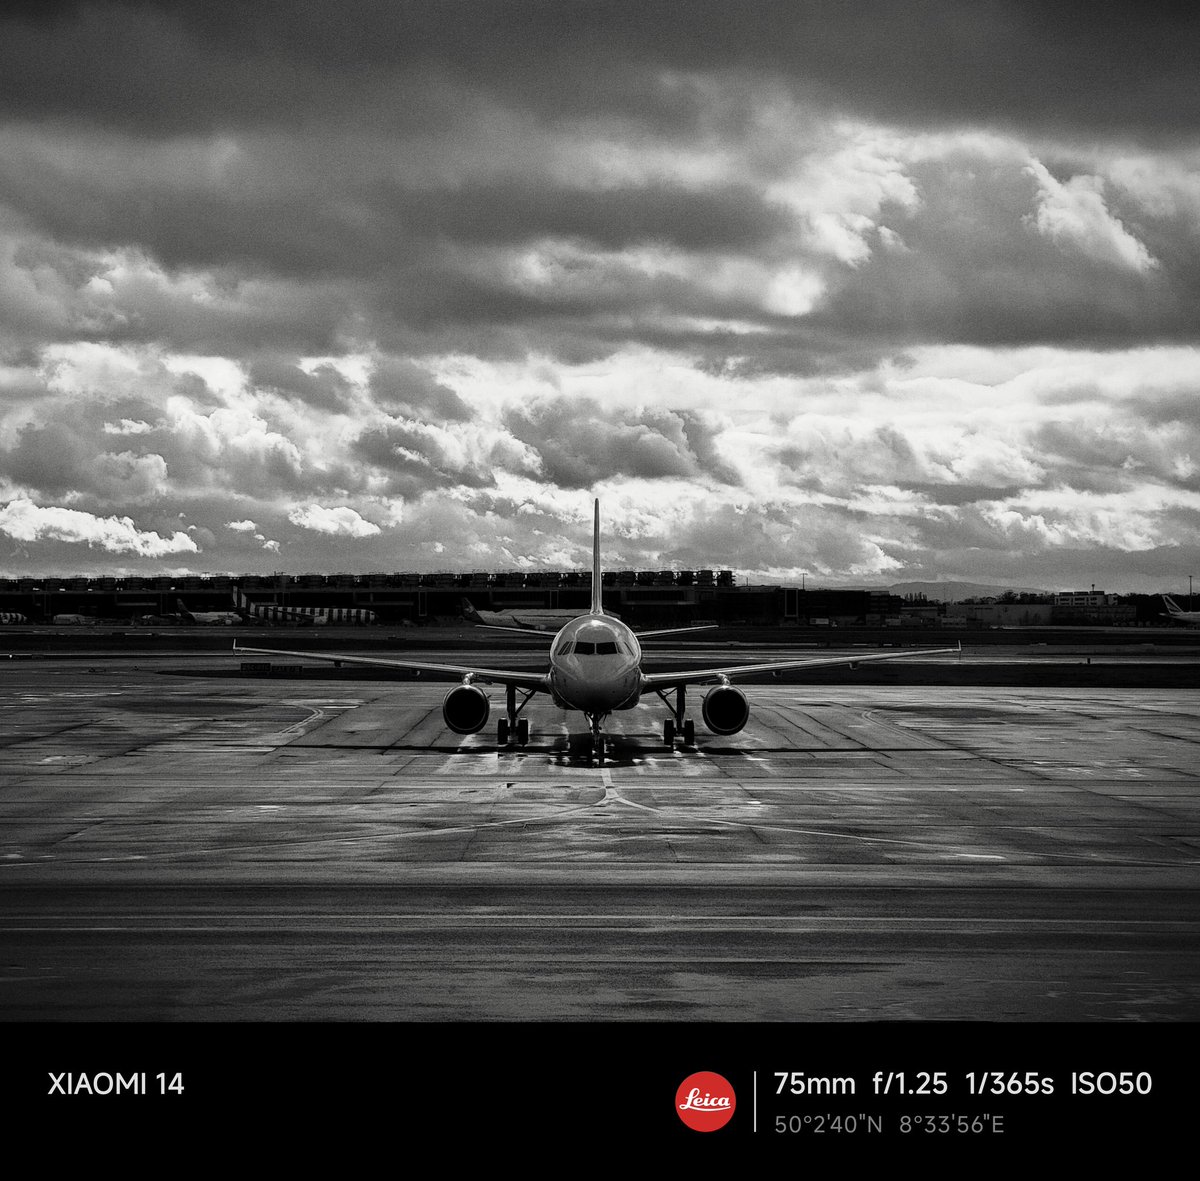 #Xiaomi14 capturing the calm before the journey amidst the dramatic skies *75mm lens in Leica BW HC